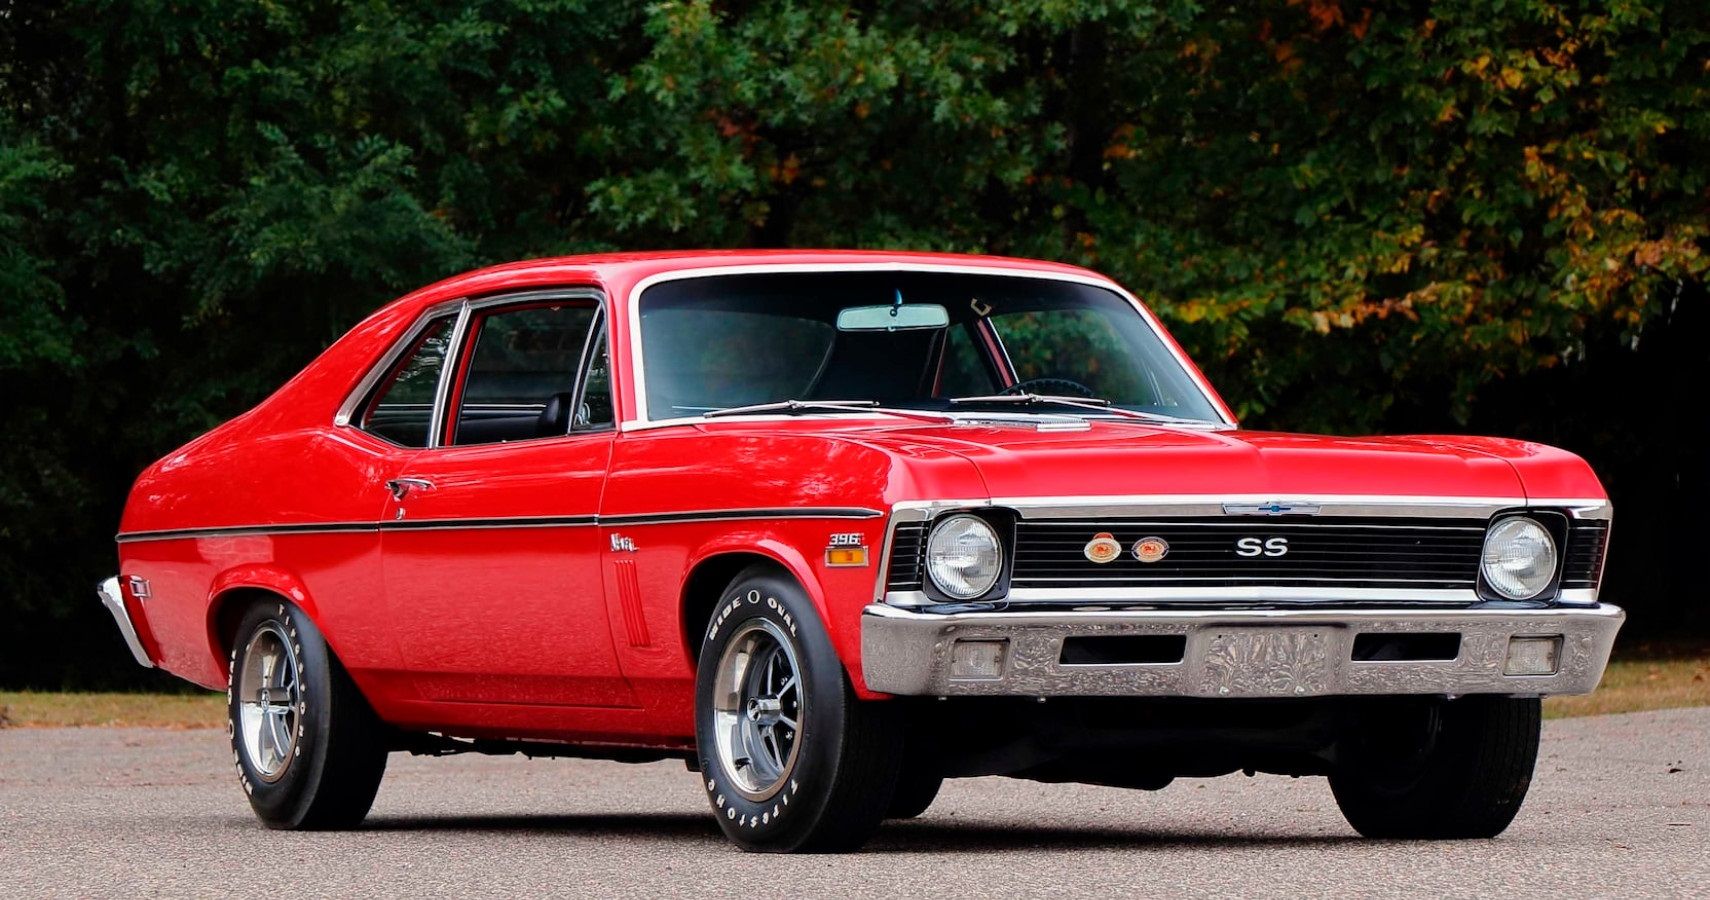 10 Reasons Why We'd Love To Own A 1970 Chevrolet Nova SS 396